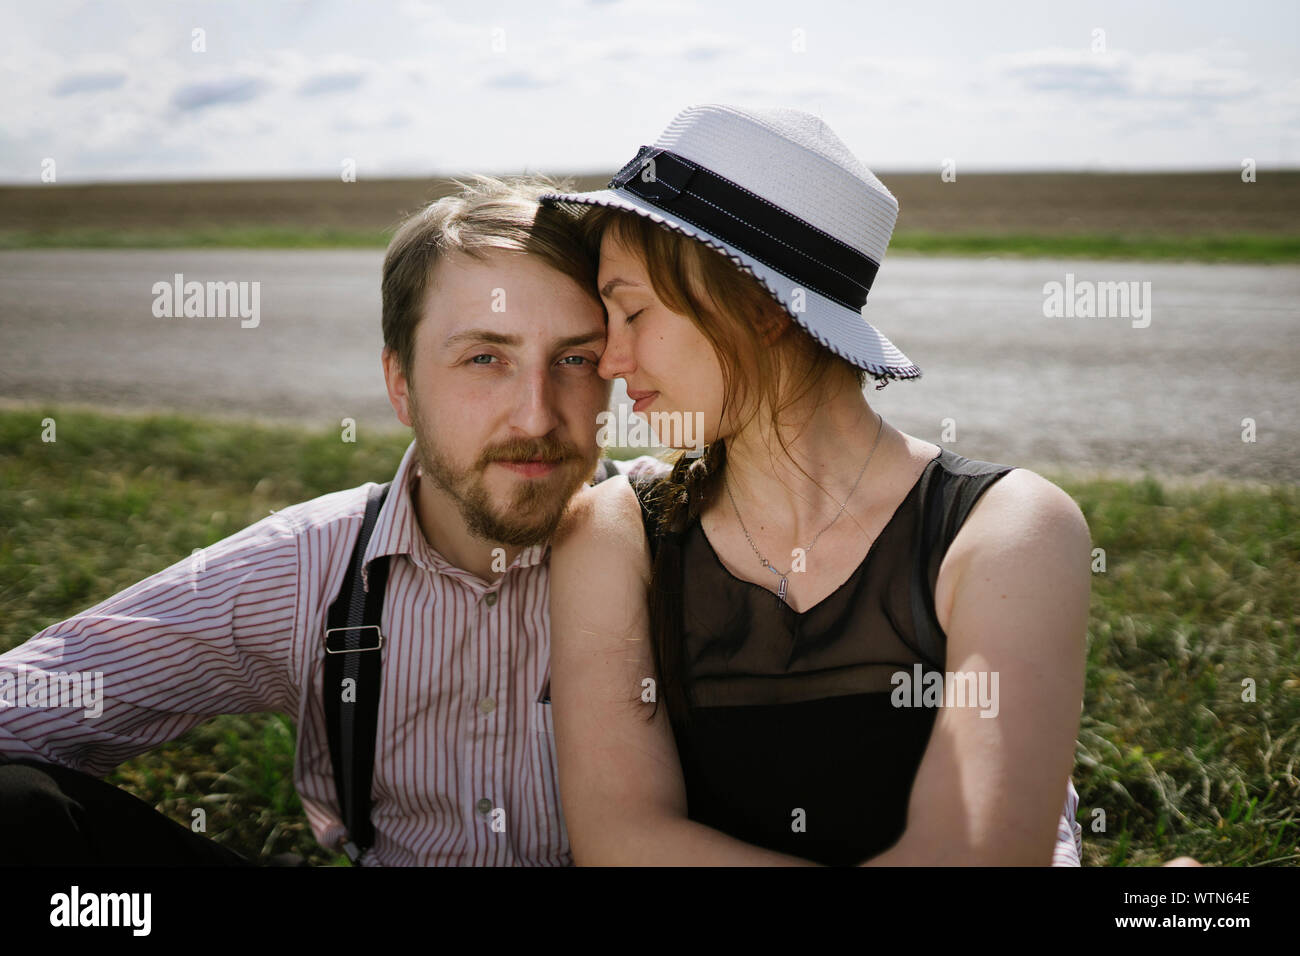 couple in love sitting near the road Stock Photo